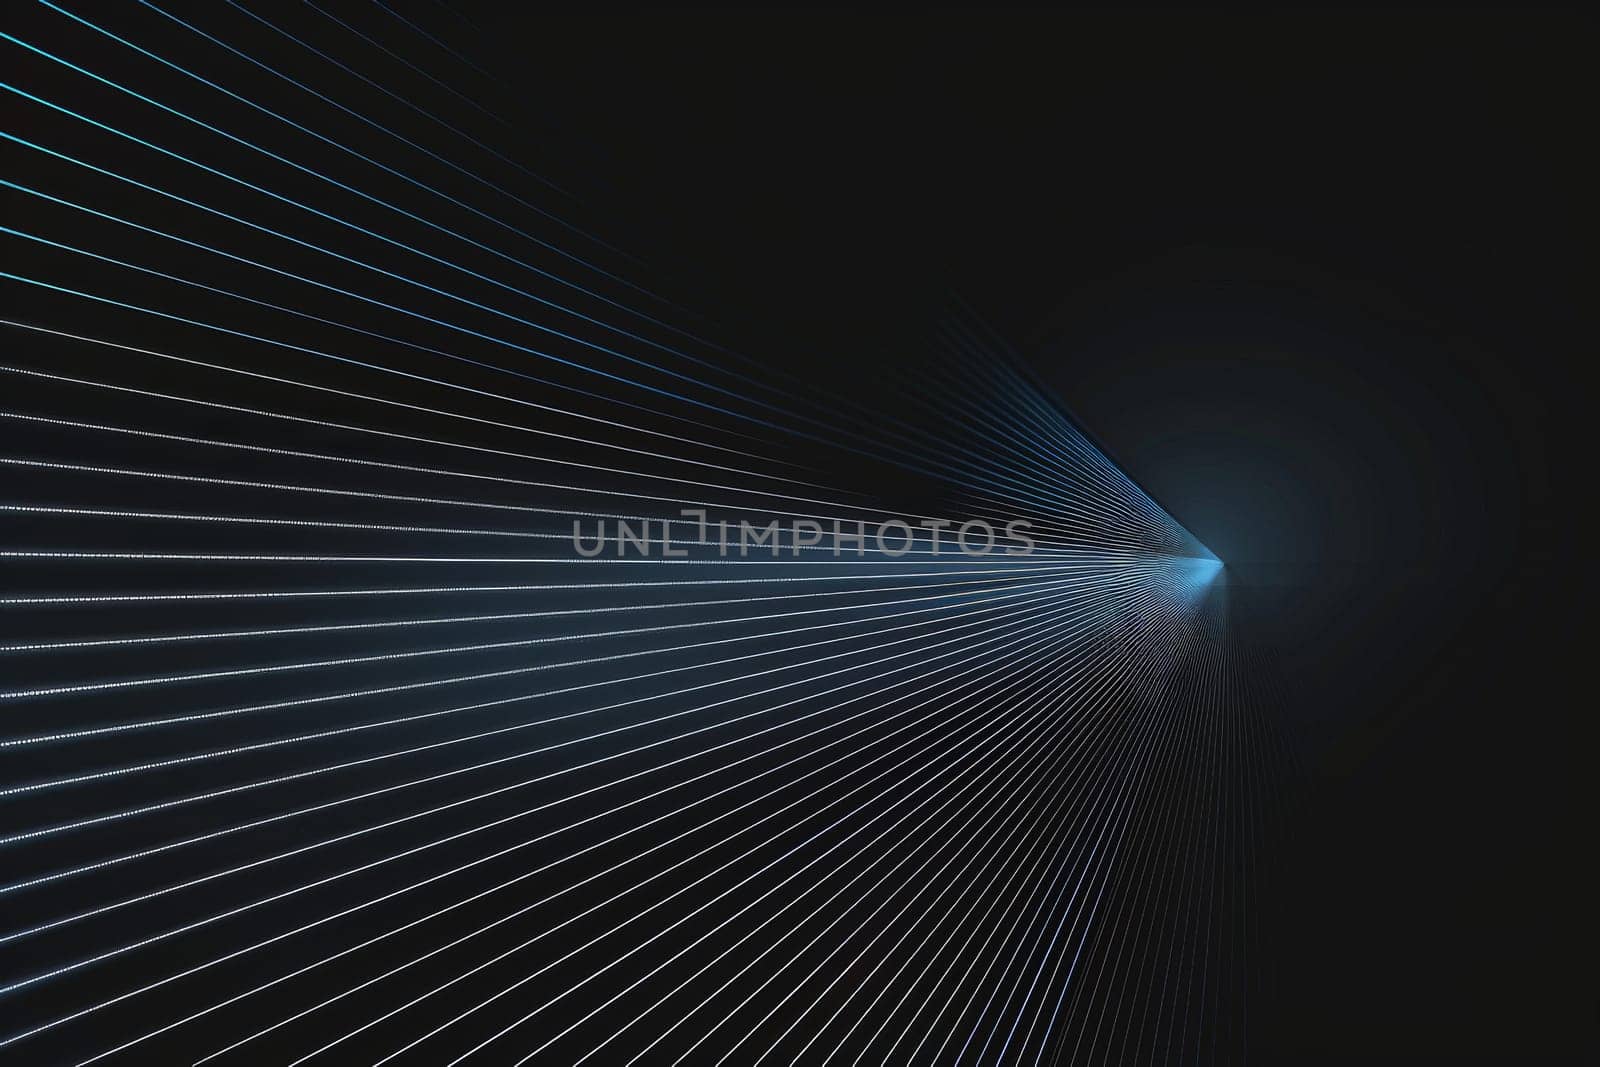 horizontal gridlines light blue on black background for web design, gridlines abstract background by nijieimu